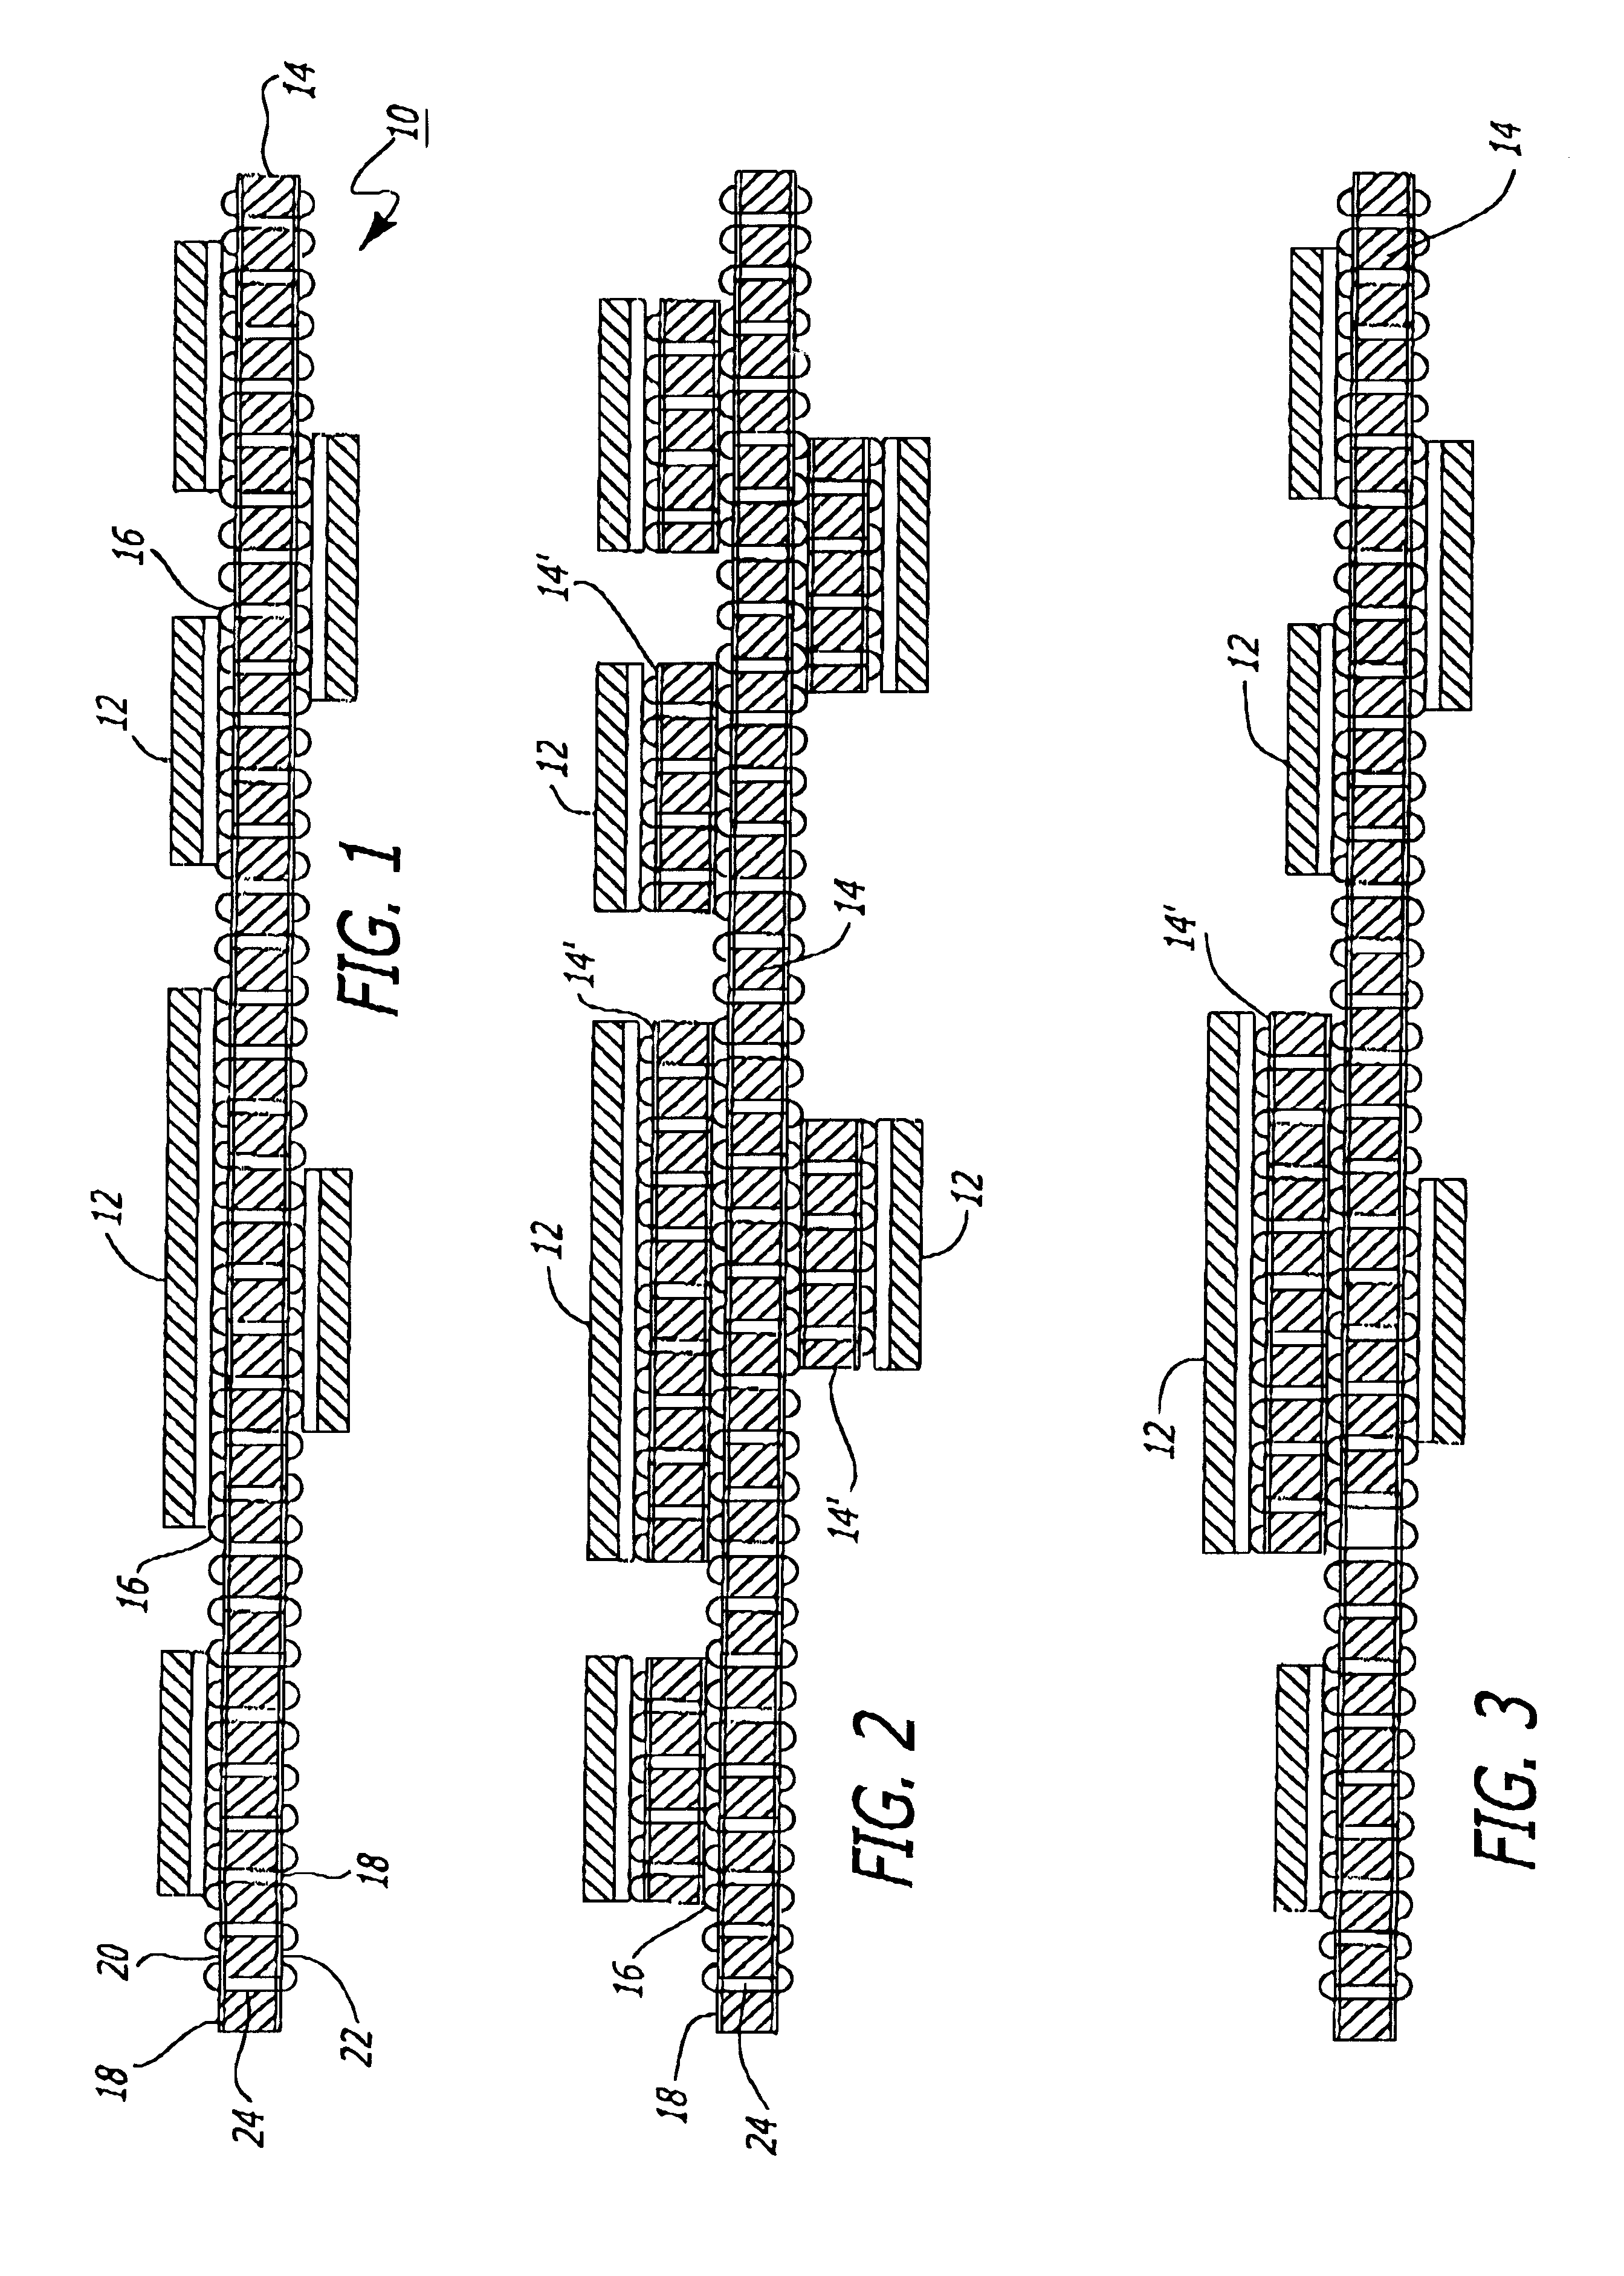 Silicon interposer and multi-chip-module (MCM) with through substrate vias